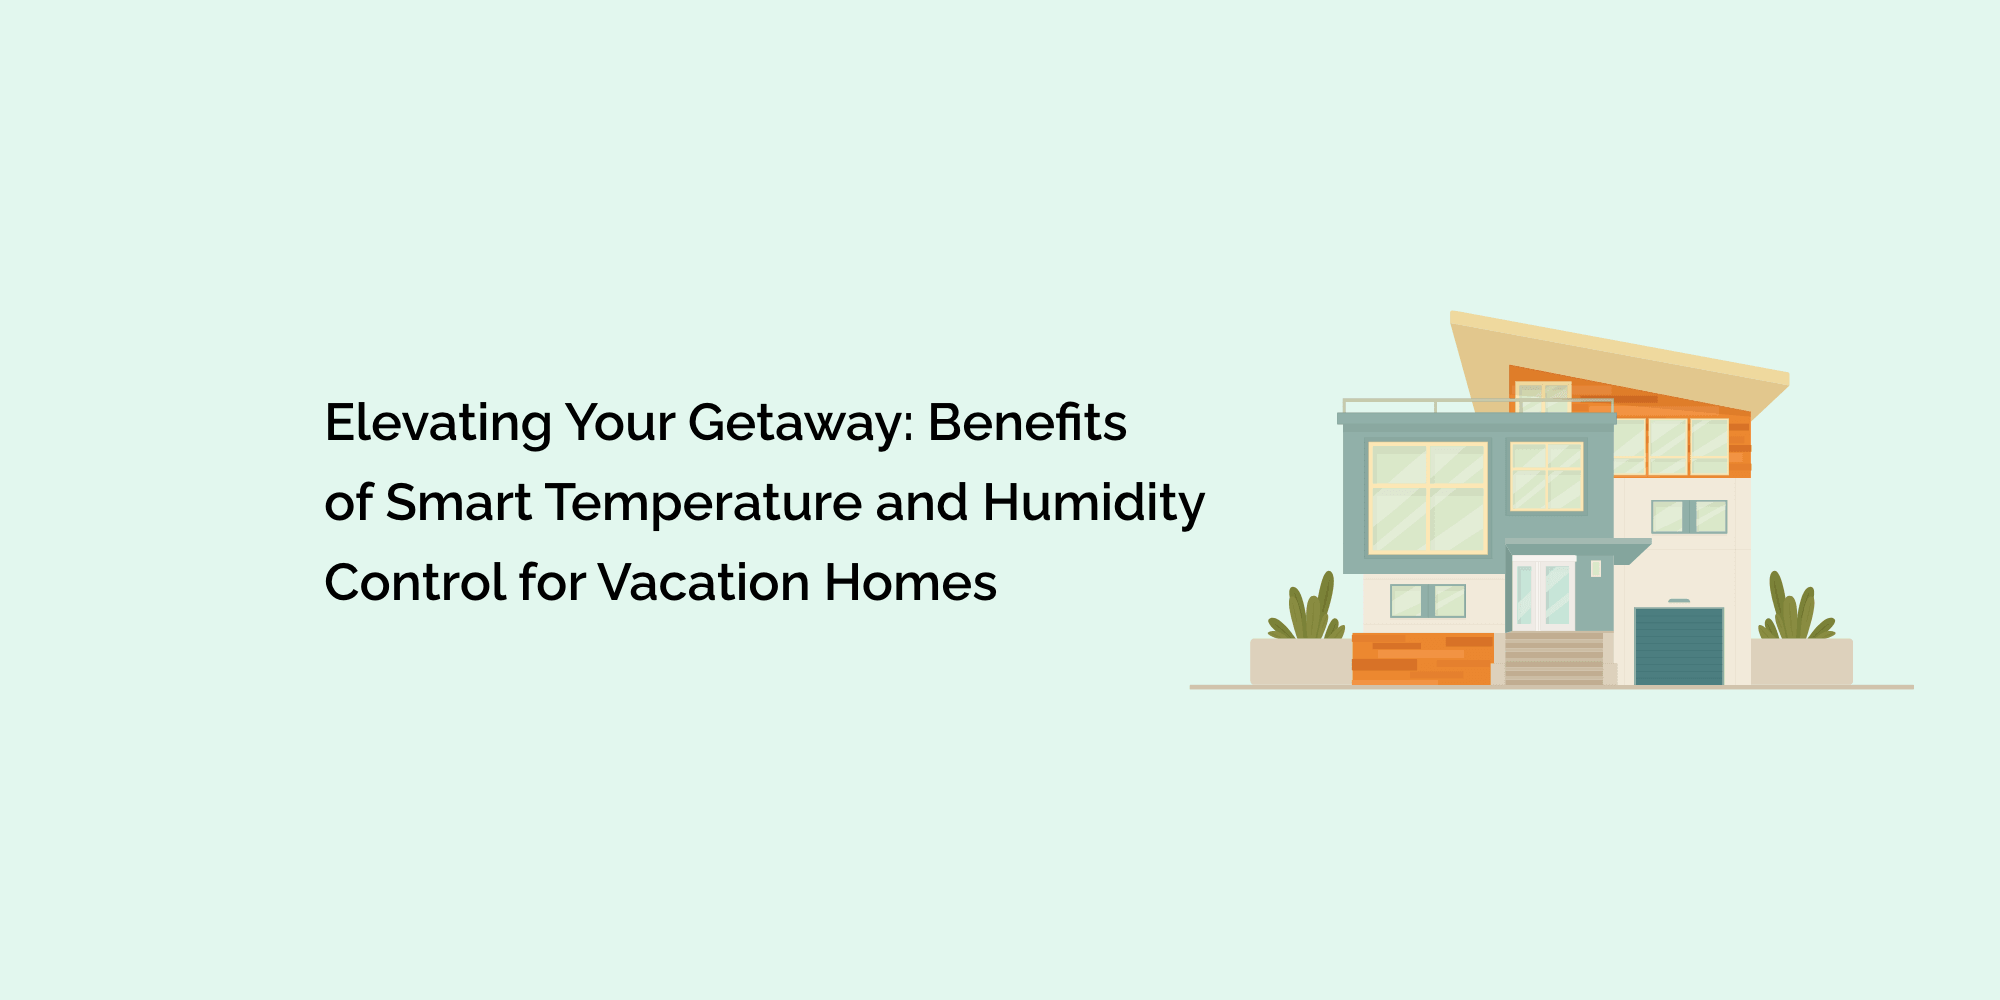 Elevating Your Getaway: Benefits of Smart Temperature and Humidity Control for Vacation Homes